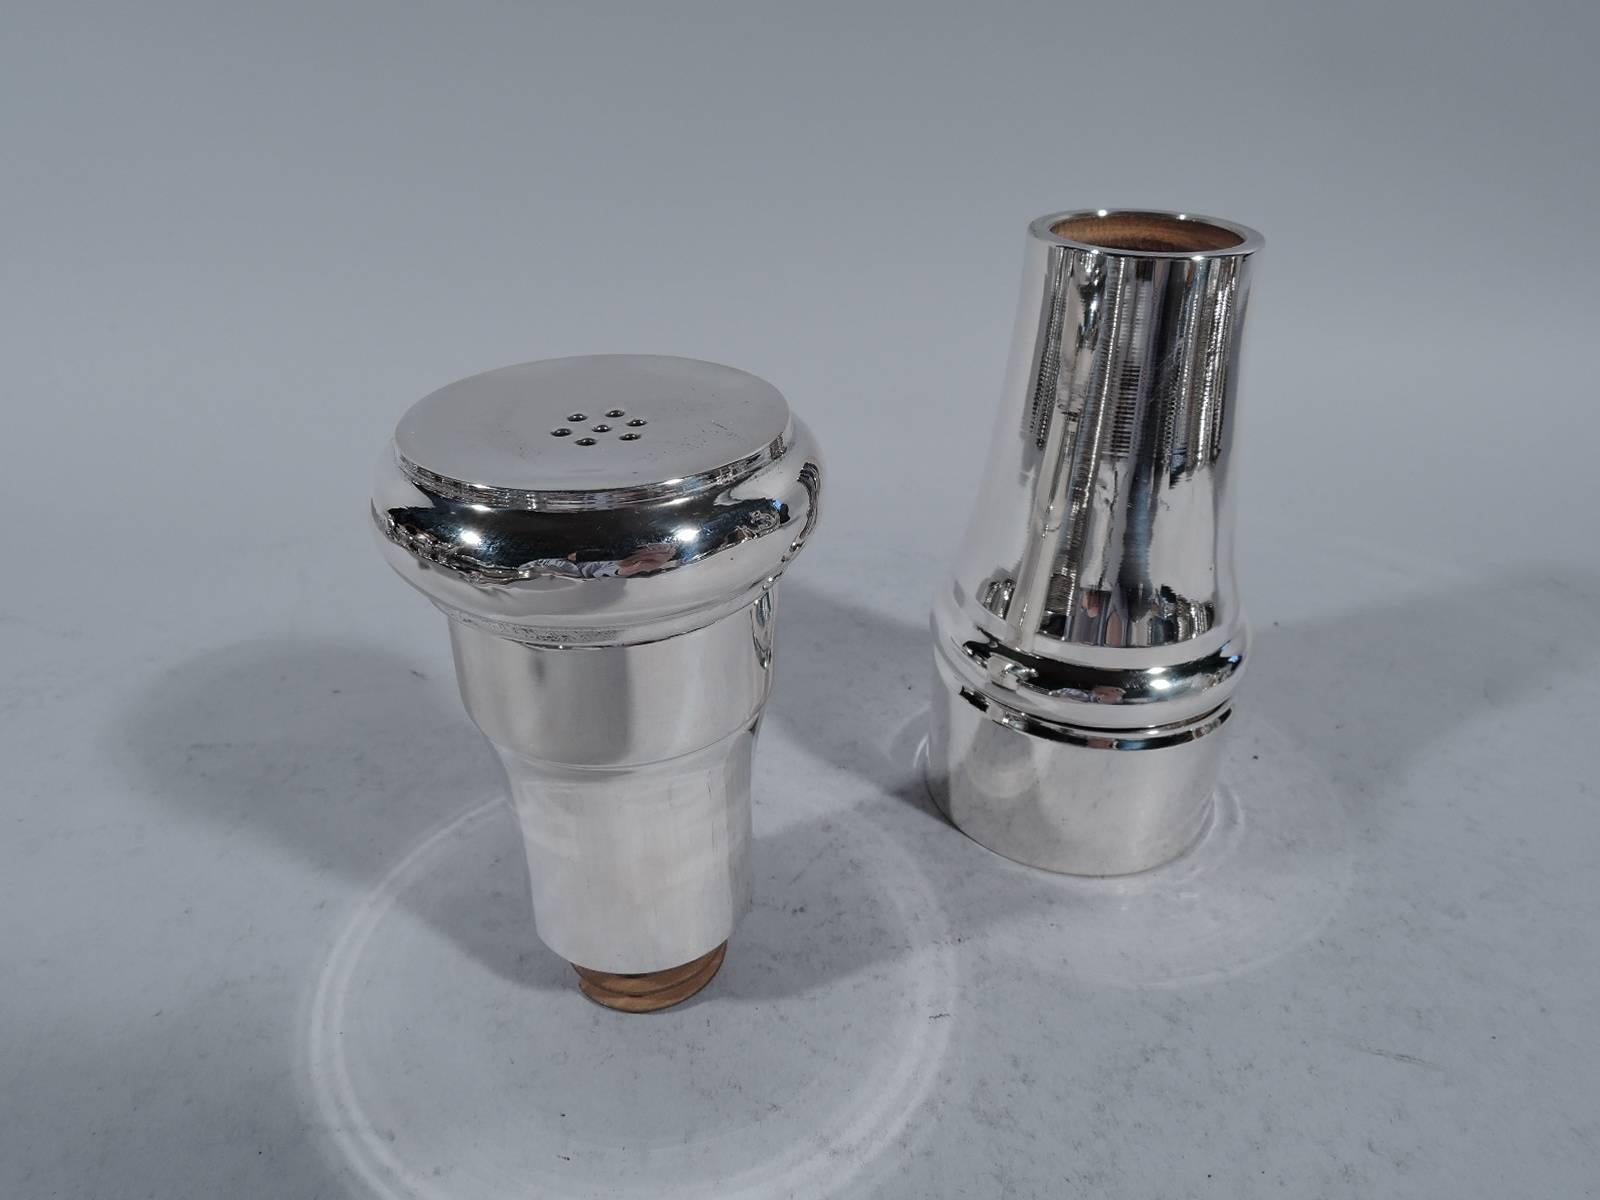 Italian Tiffany Modern All-in-One Sterling Silver Pepper Grinder and Salt Shaker